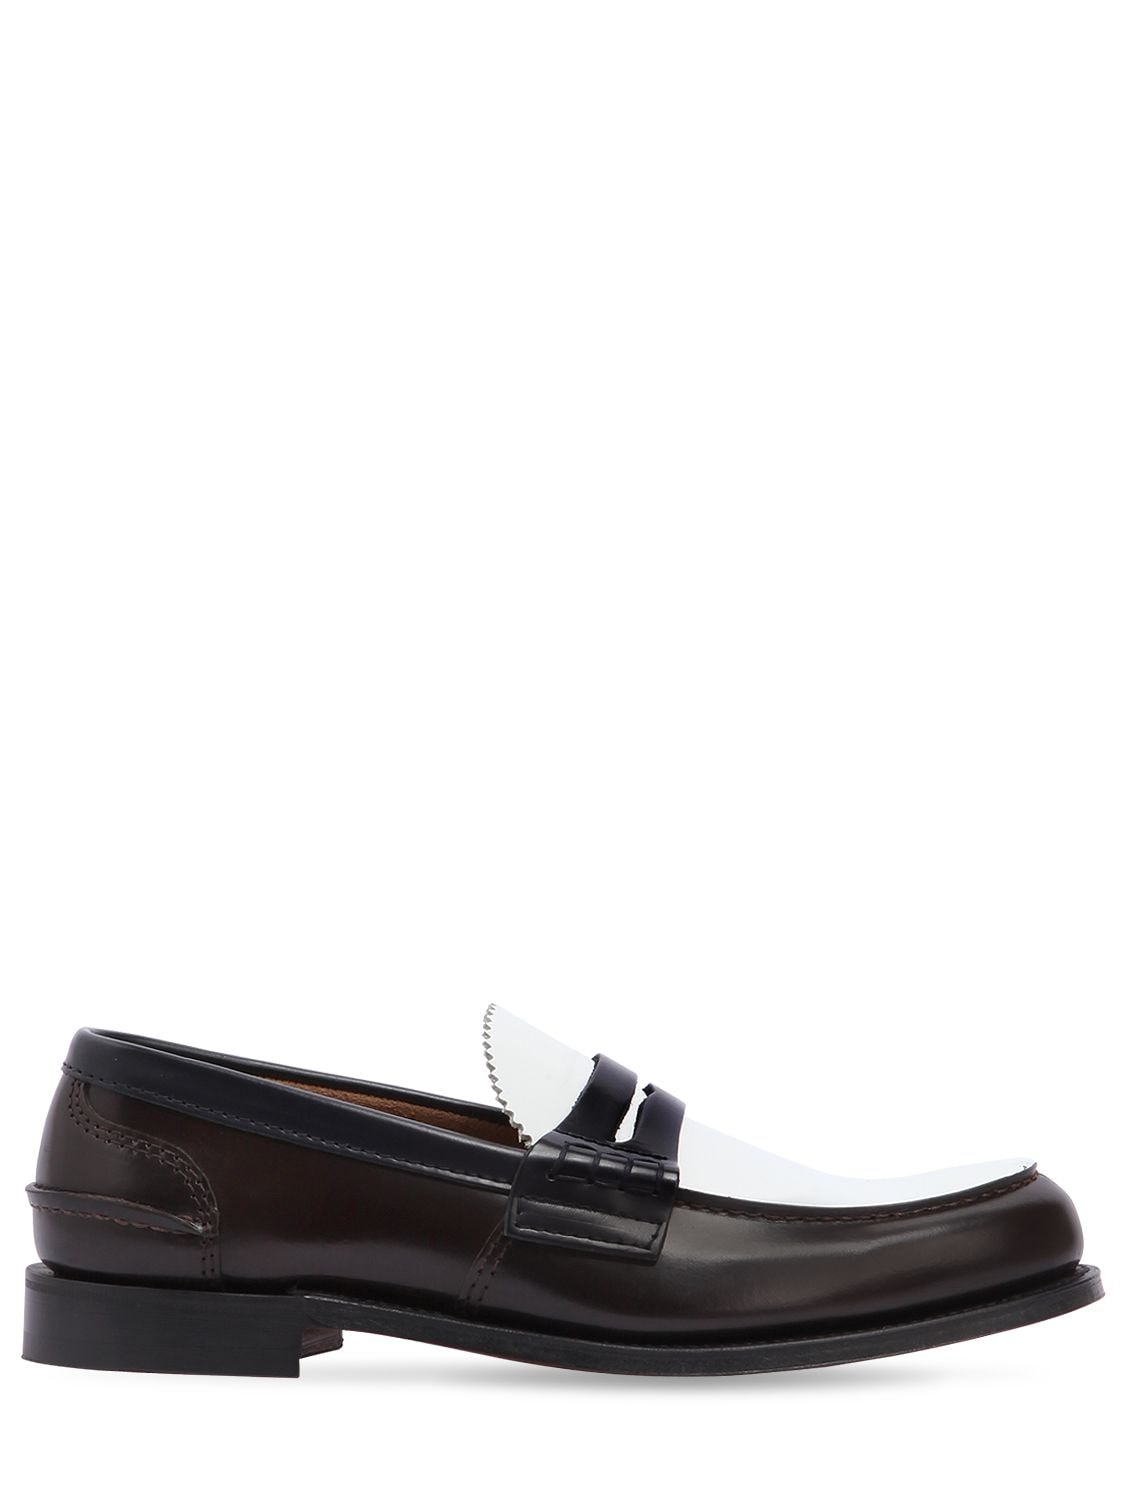 CHURCH'S PEMBREY POLISHED LEATHER LOAFERS,67IW1S006-RJBWWEG1